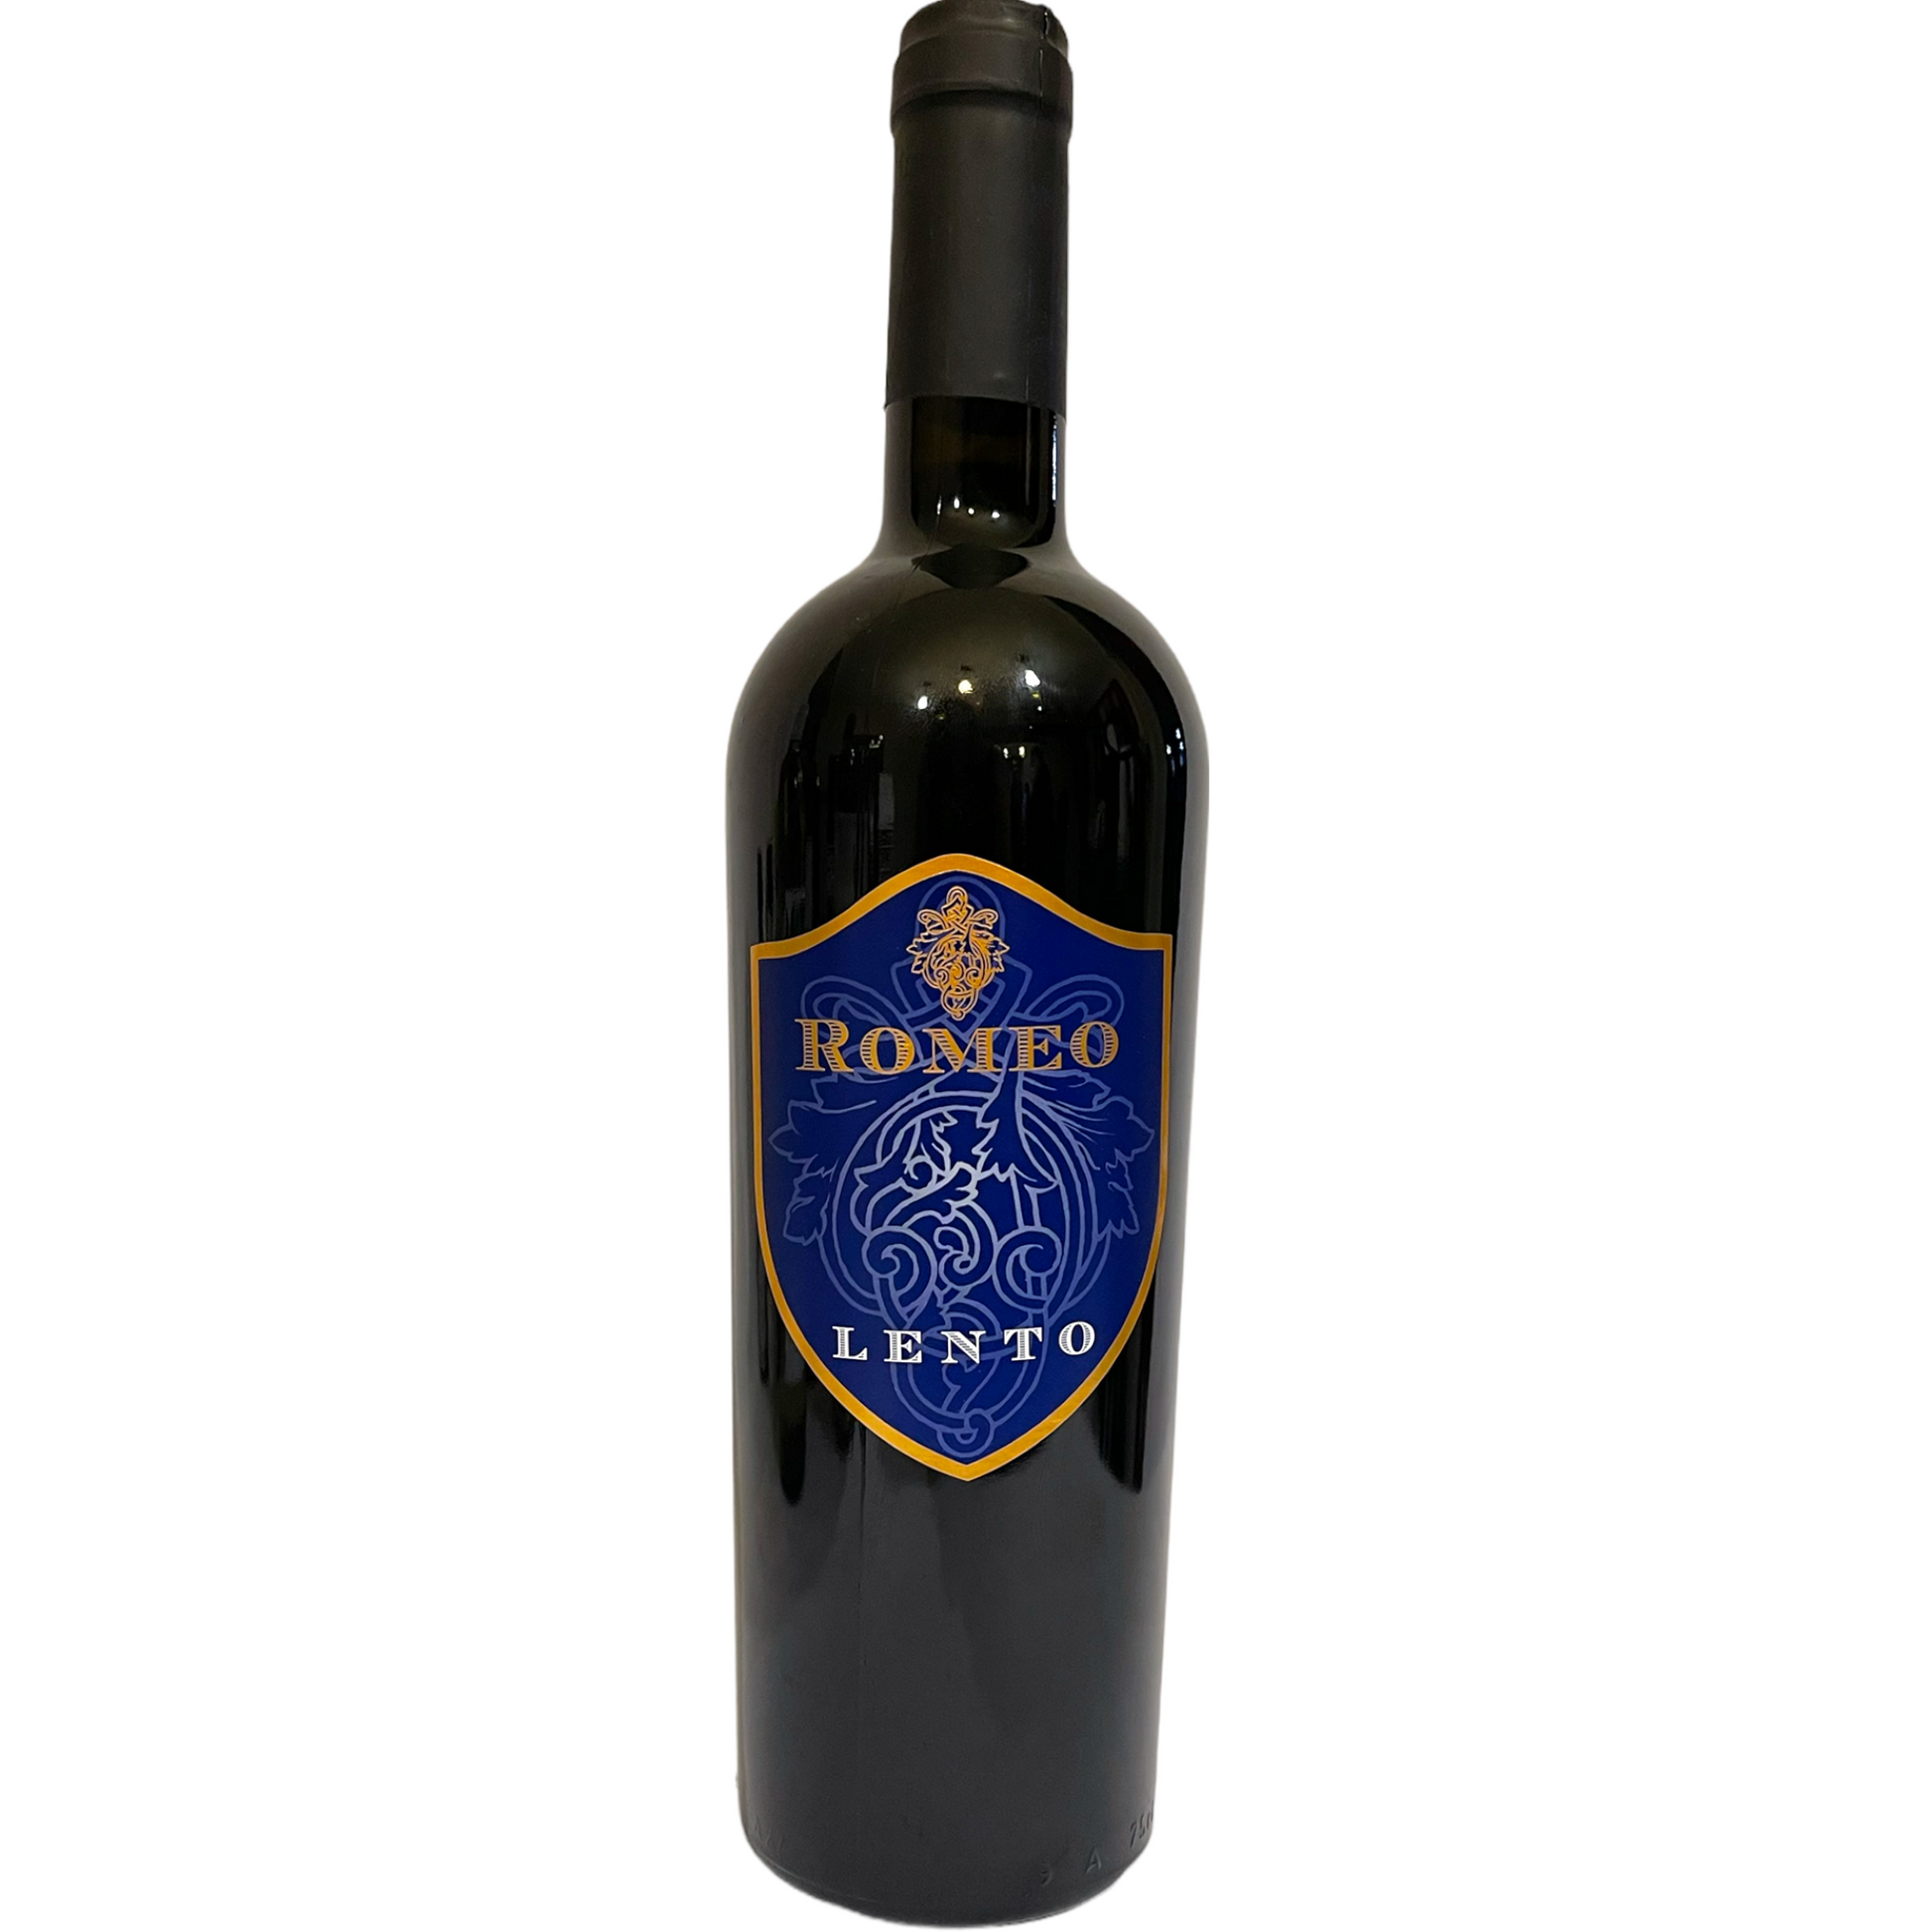 Grand Sud Merlot, Product page